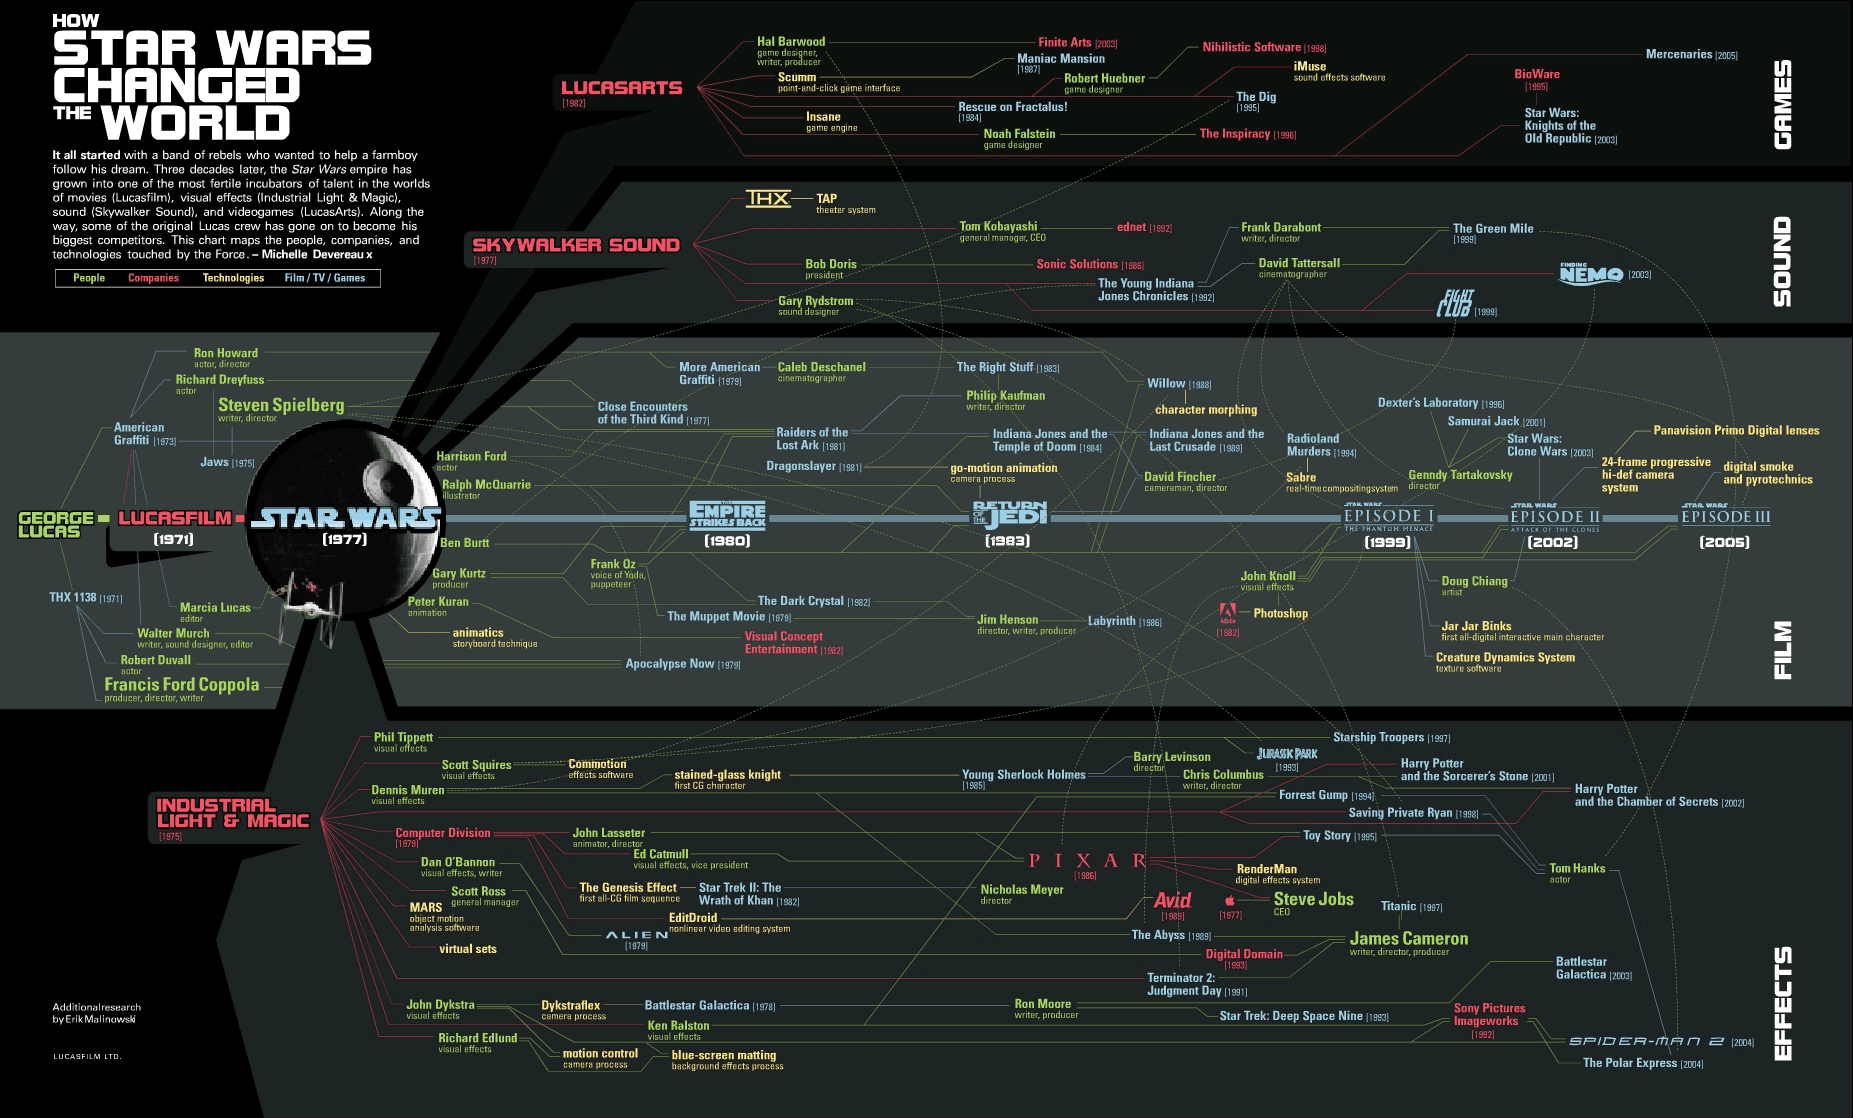 Star-Wars-World-Influence-Infographic-1.png